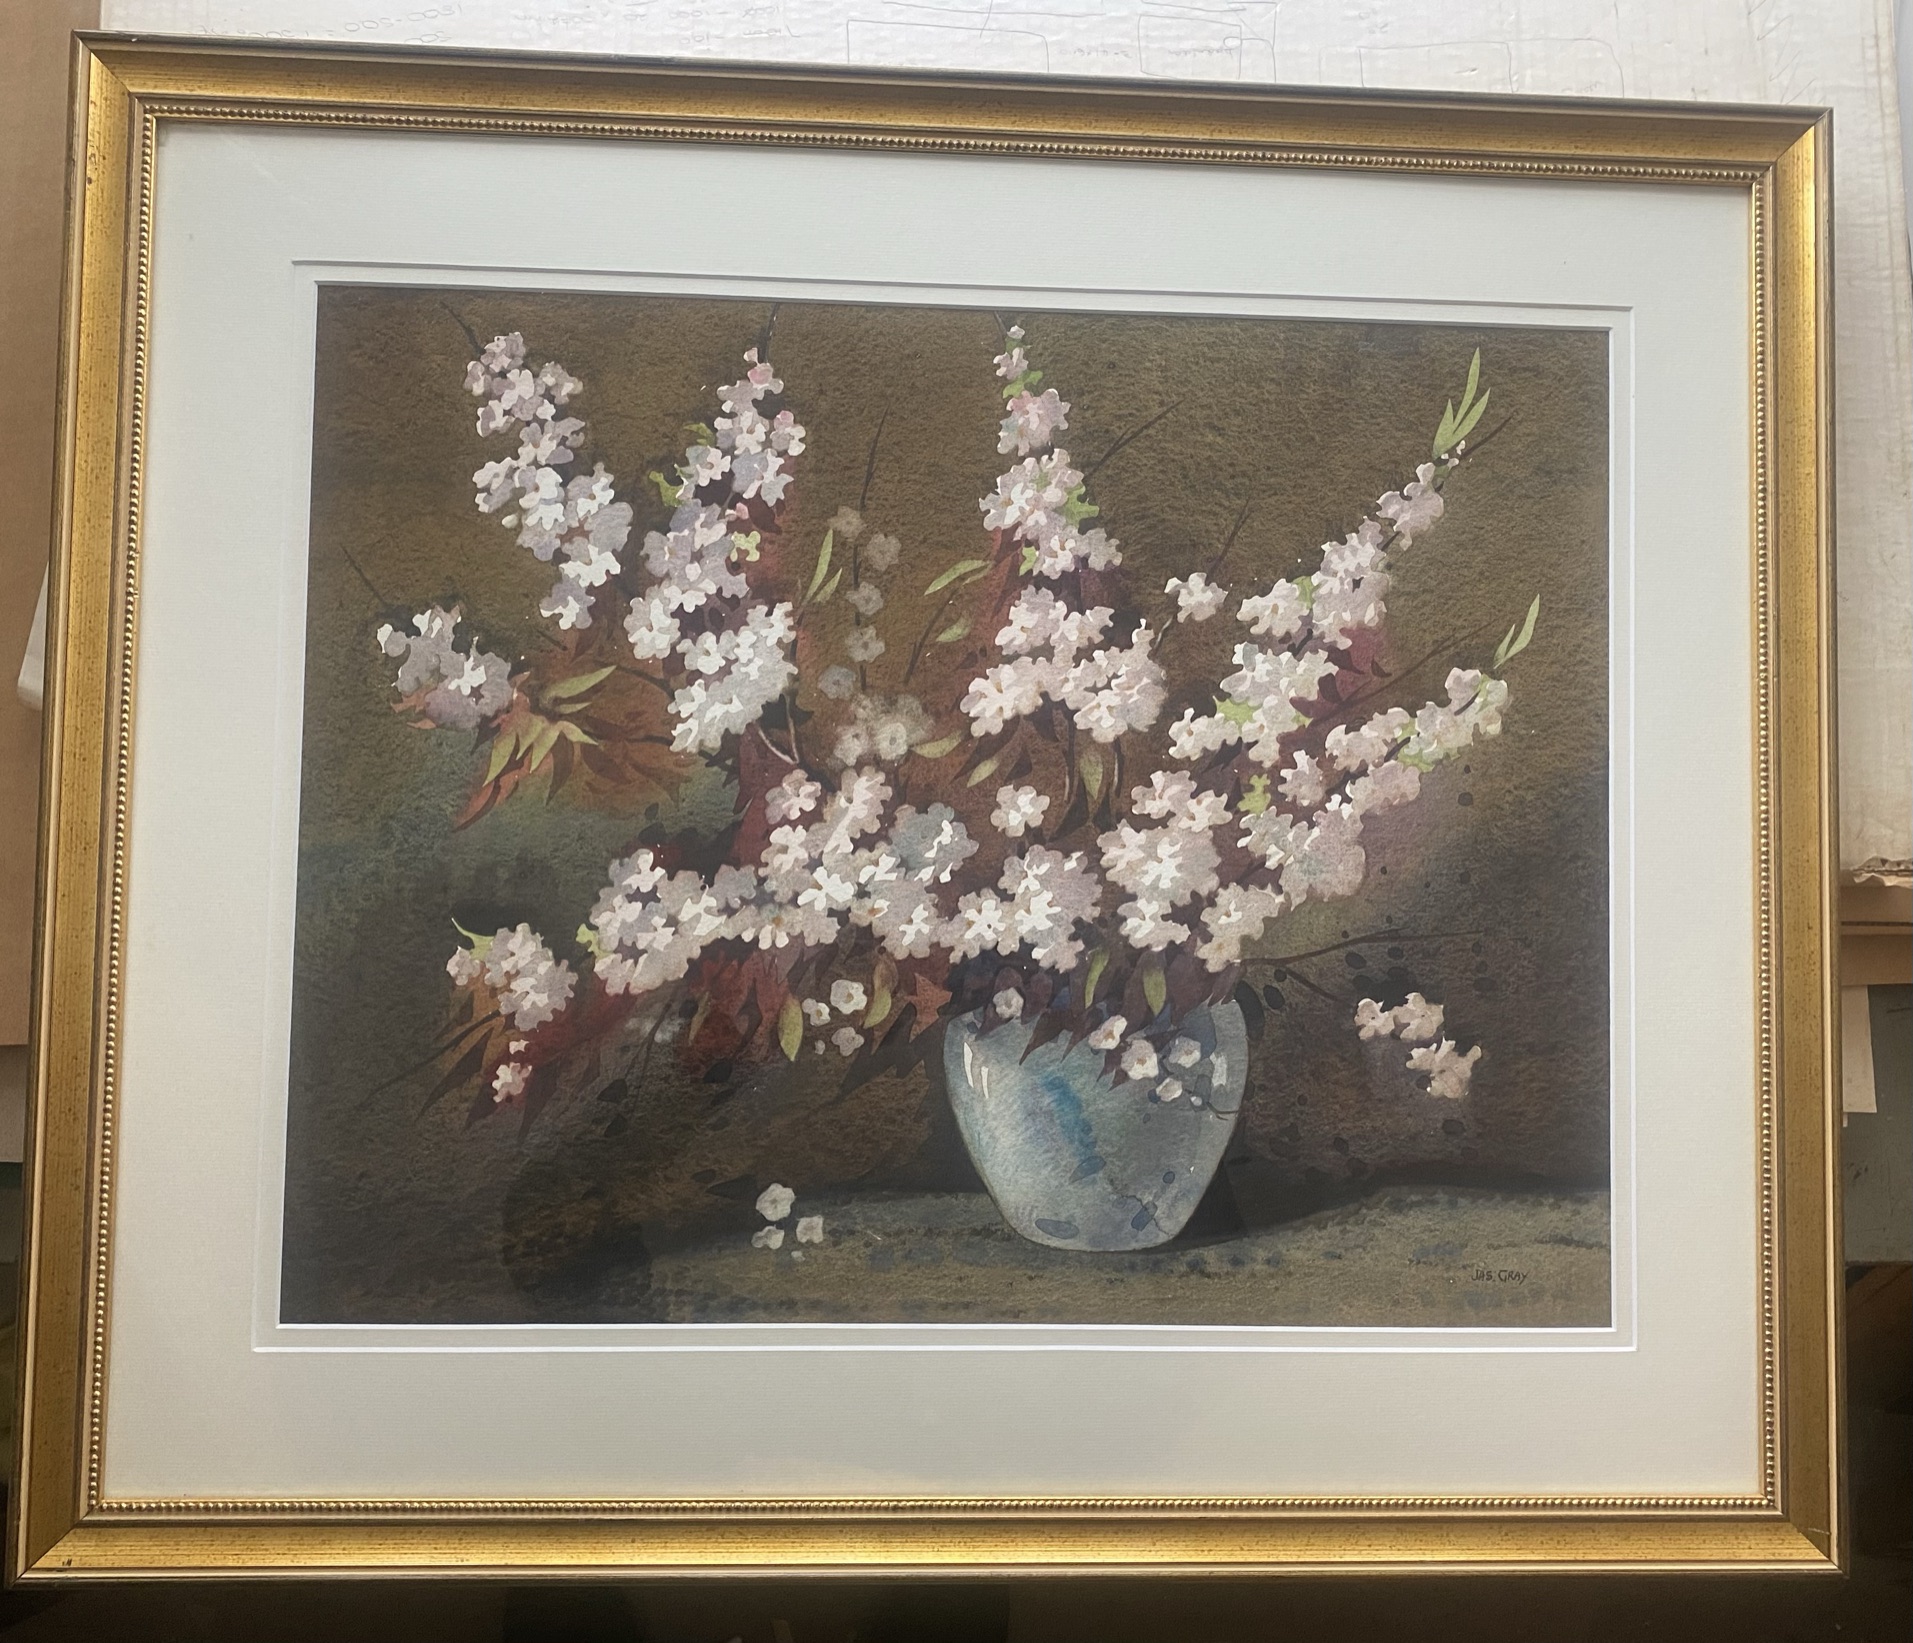 James Grey Signed watercolour still life “blossom in a vase” - Image 2 of 3